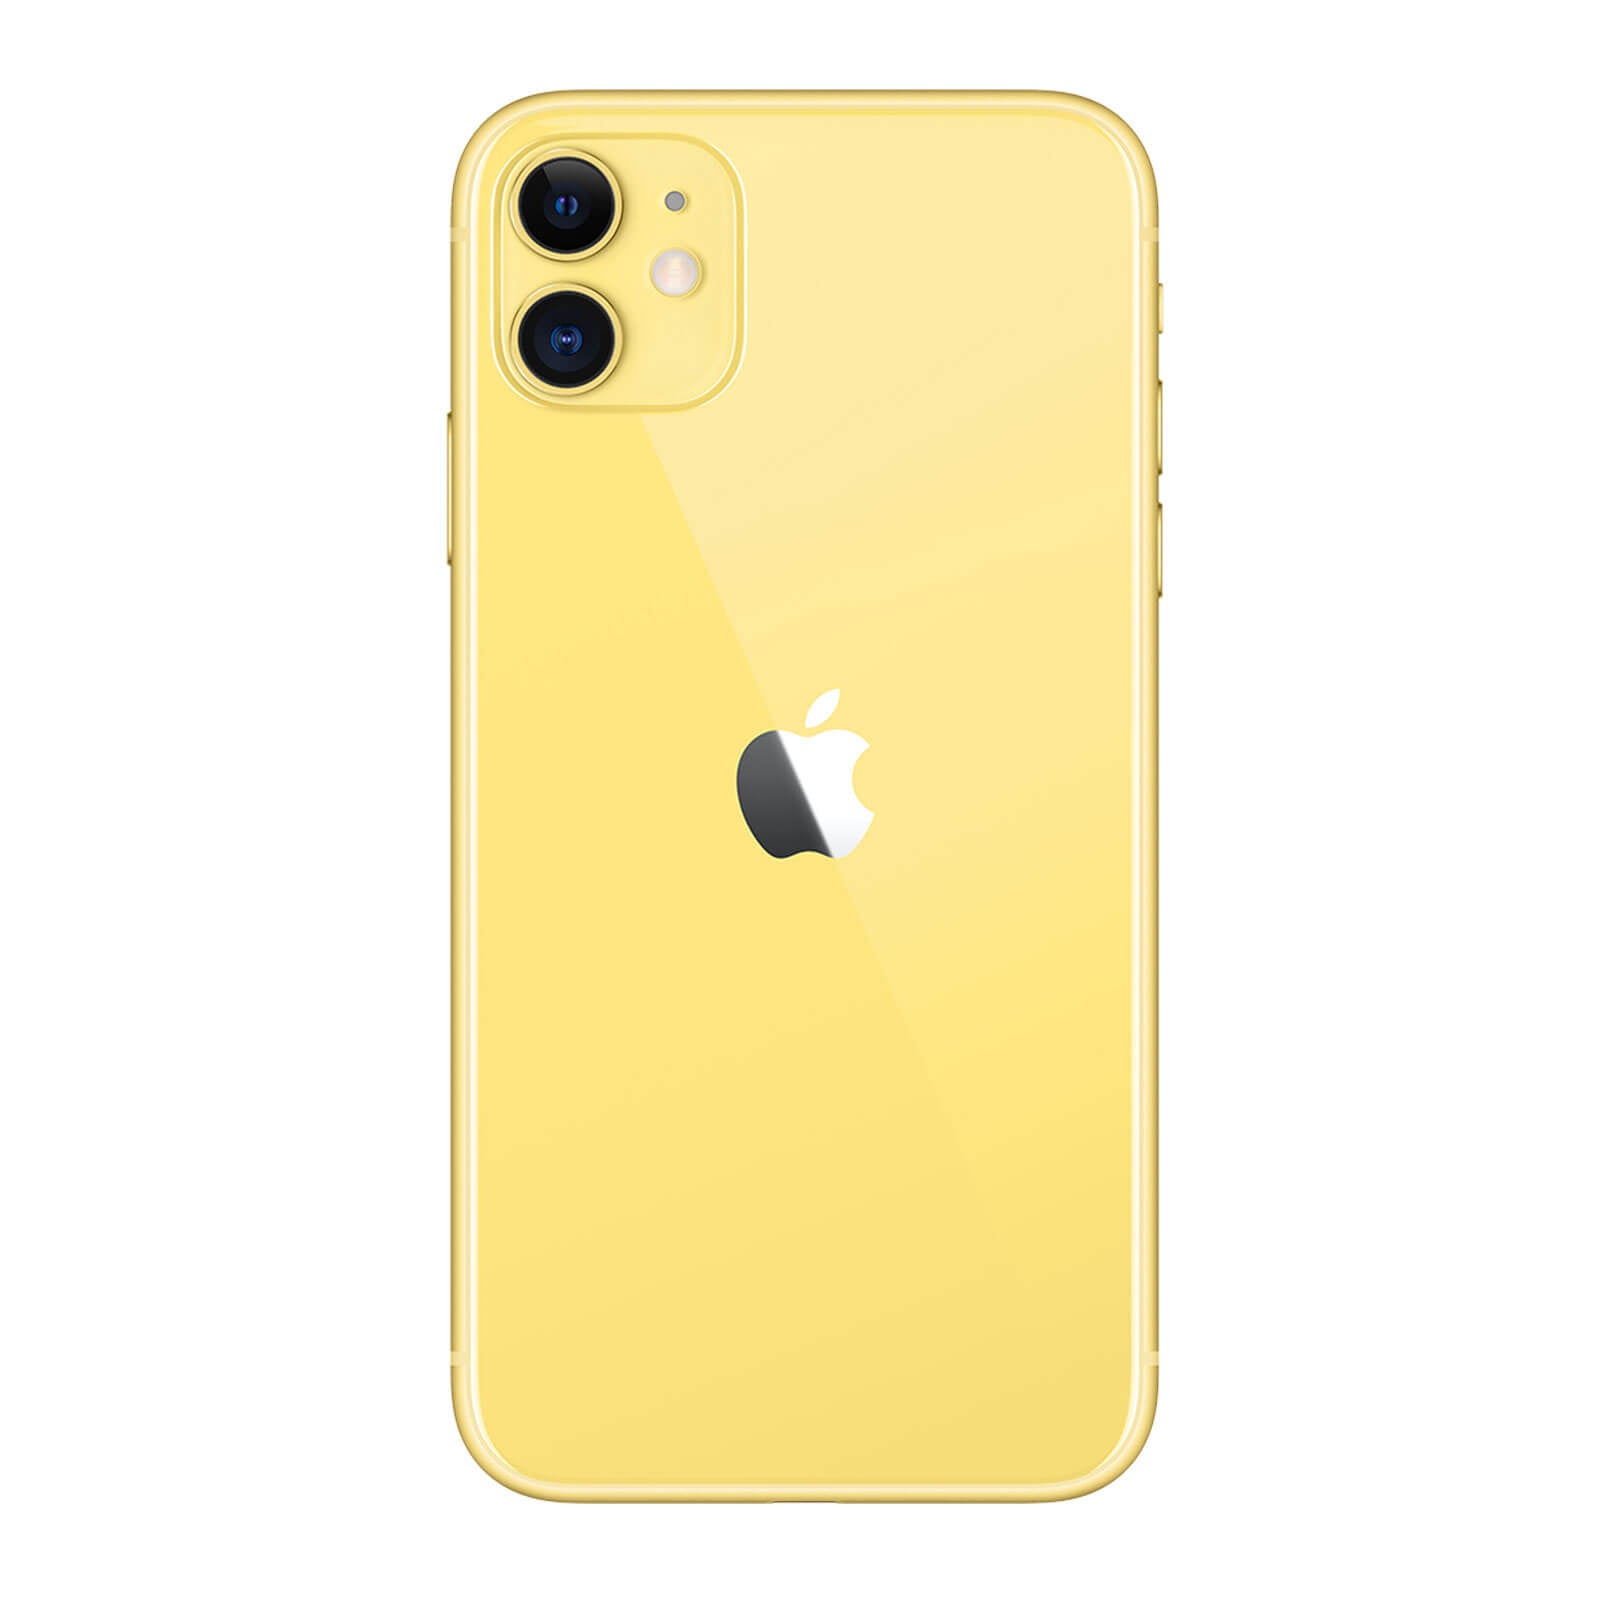 Apple iPhone 11 256GB Yellow Very Good - T-Mobile